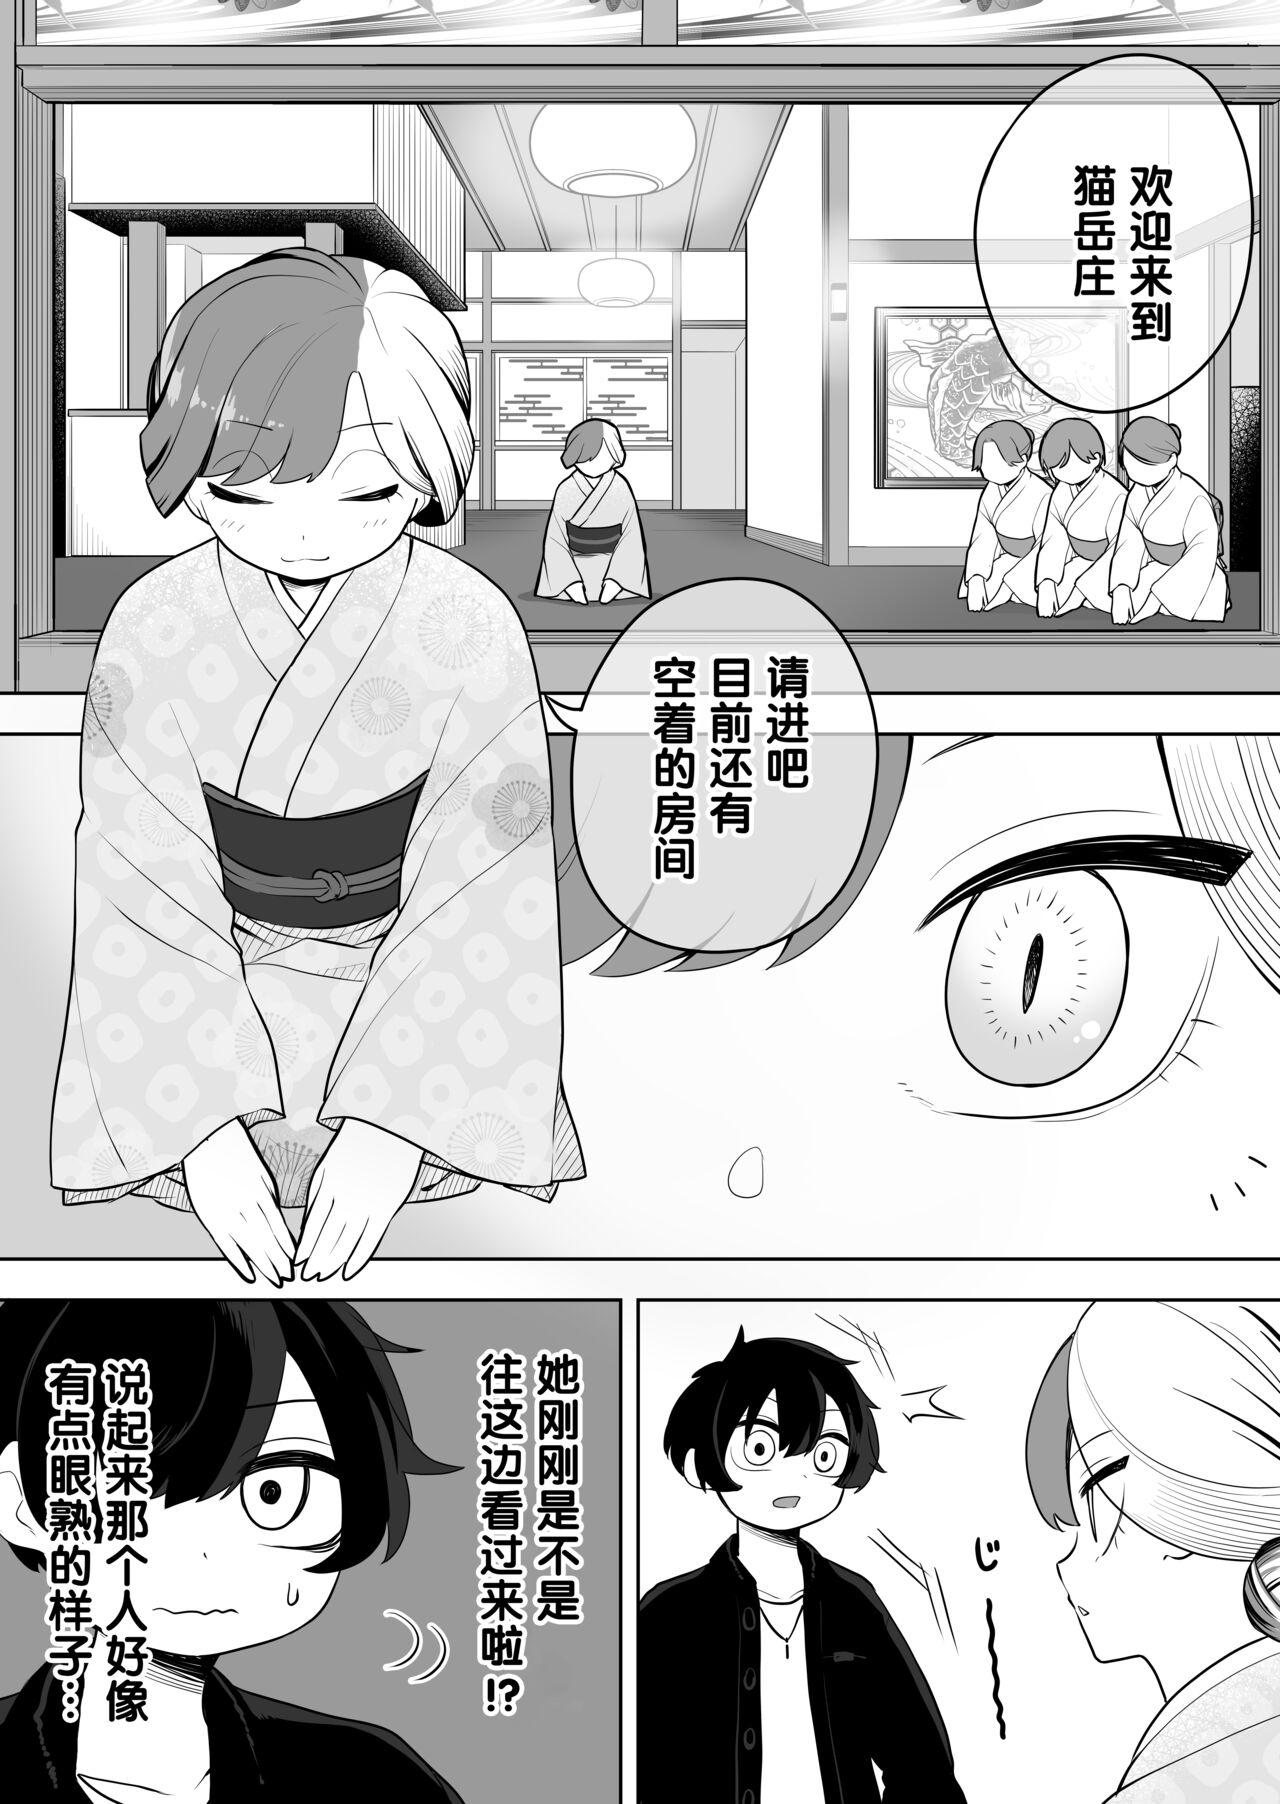 Family Roleplay 猫山怪闻 Spoon - Page 5